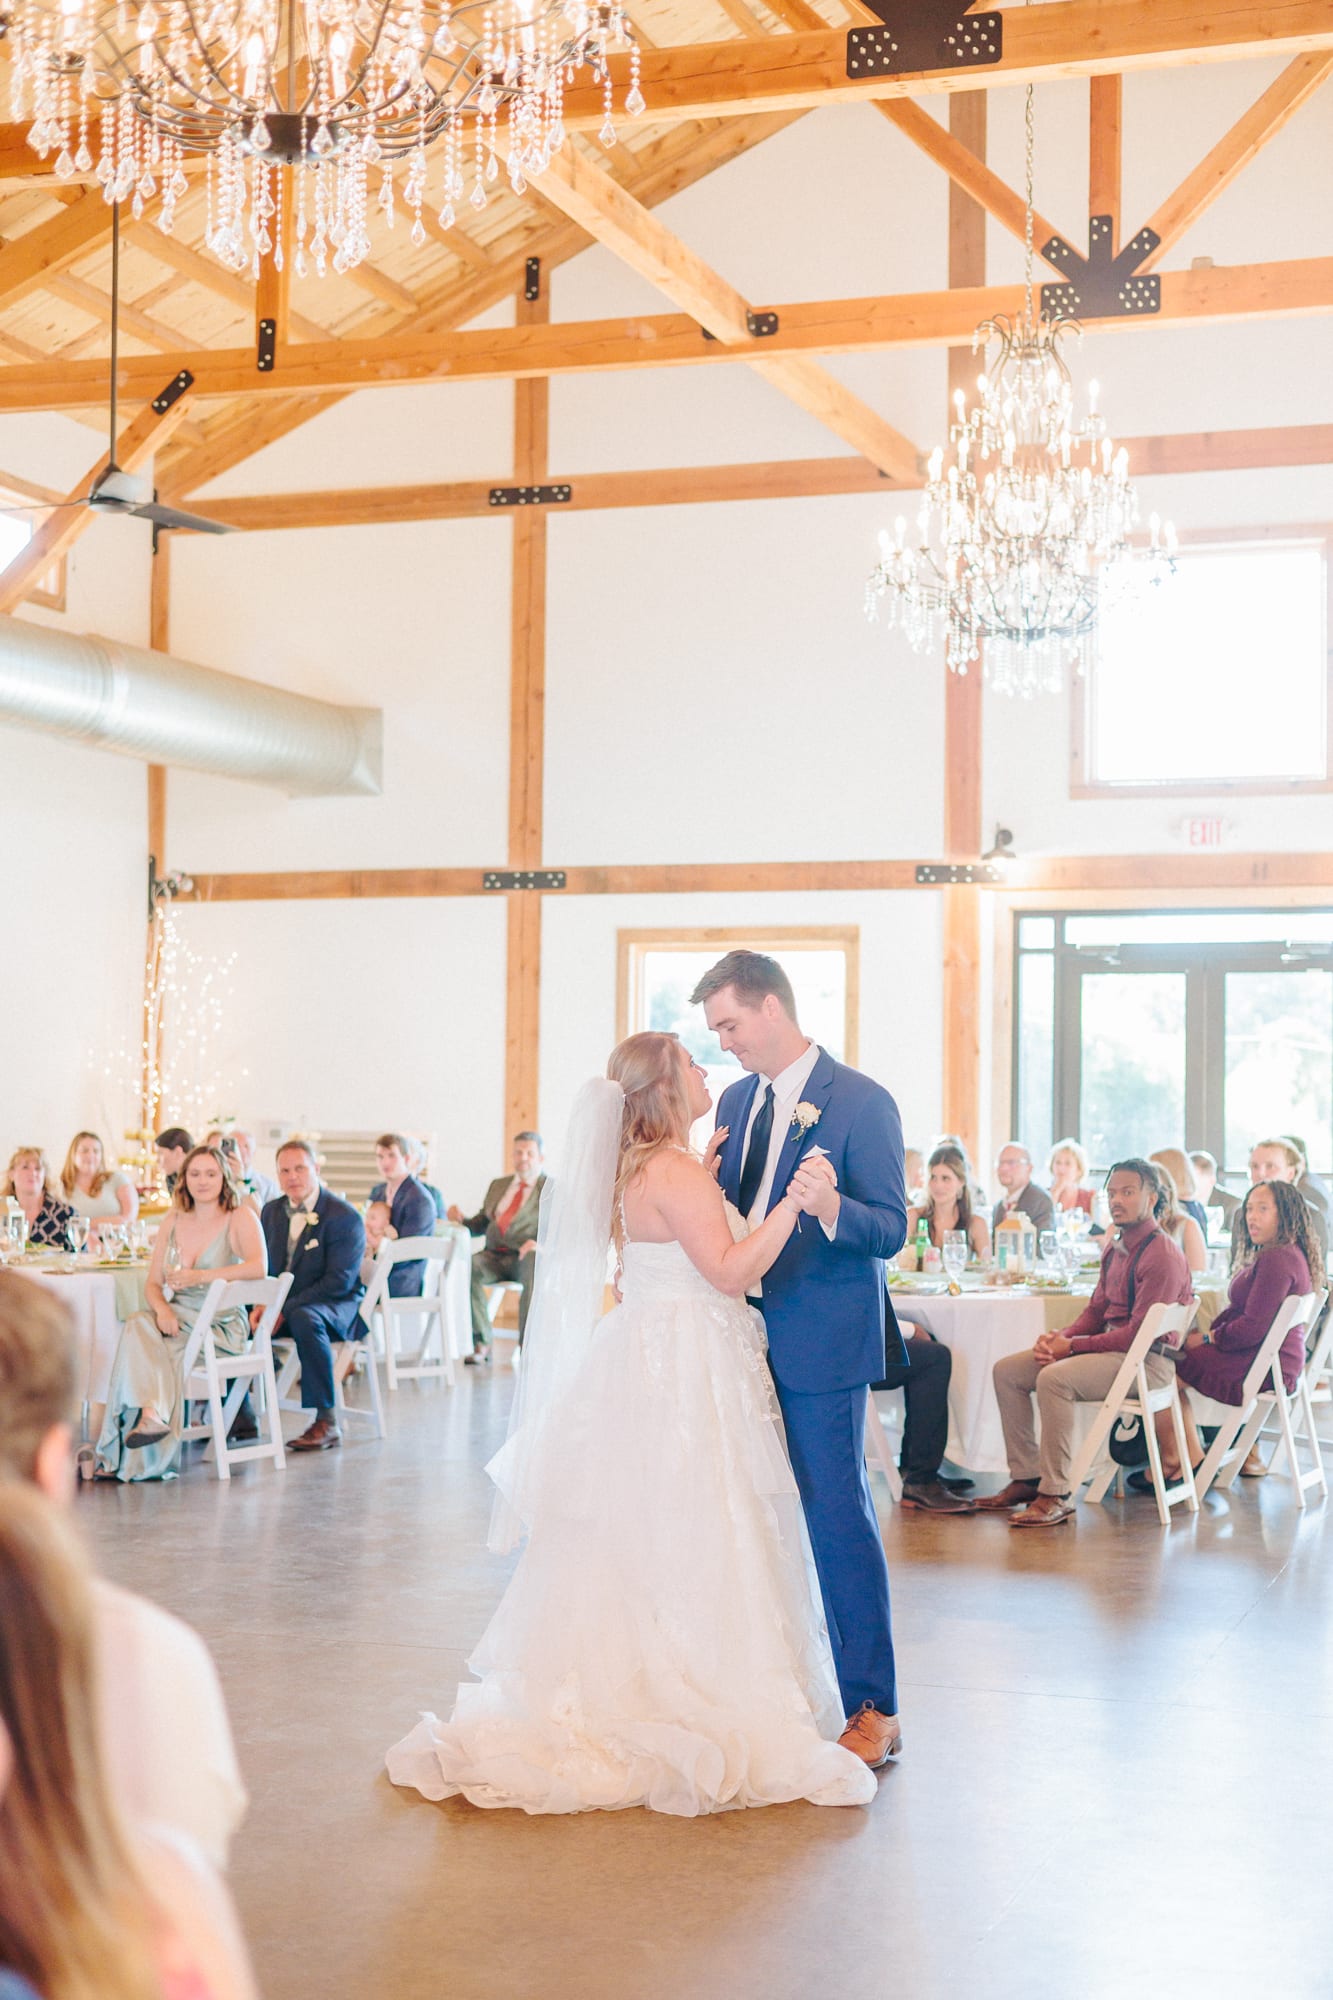 Conor and Becca enjoy their first dance inside of the barn at their wedding reception.